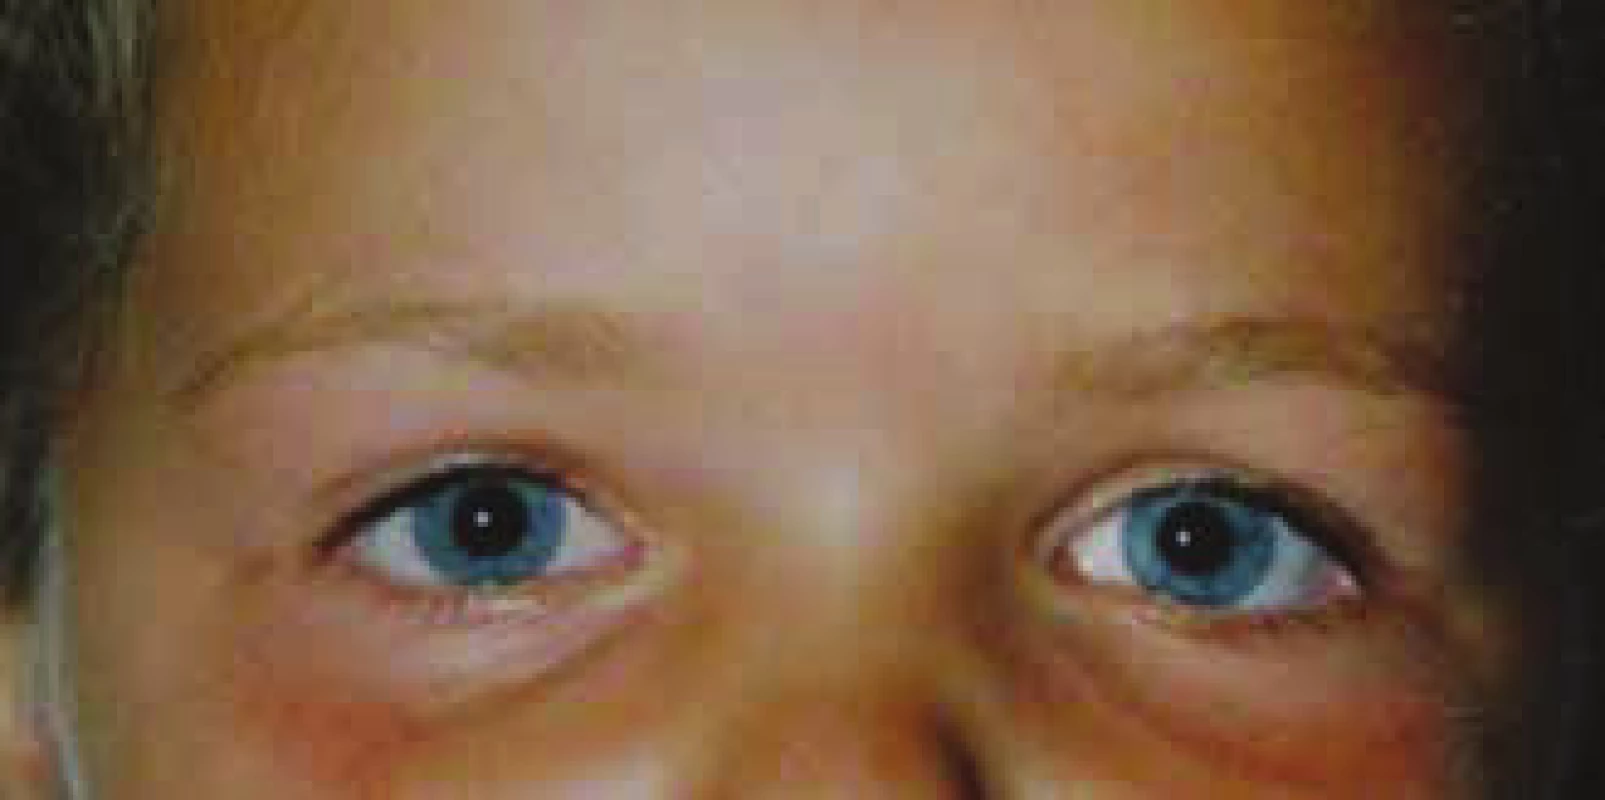 Normalisation of left pupil width at follow-up examination
of patient on second day